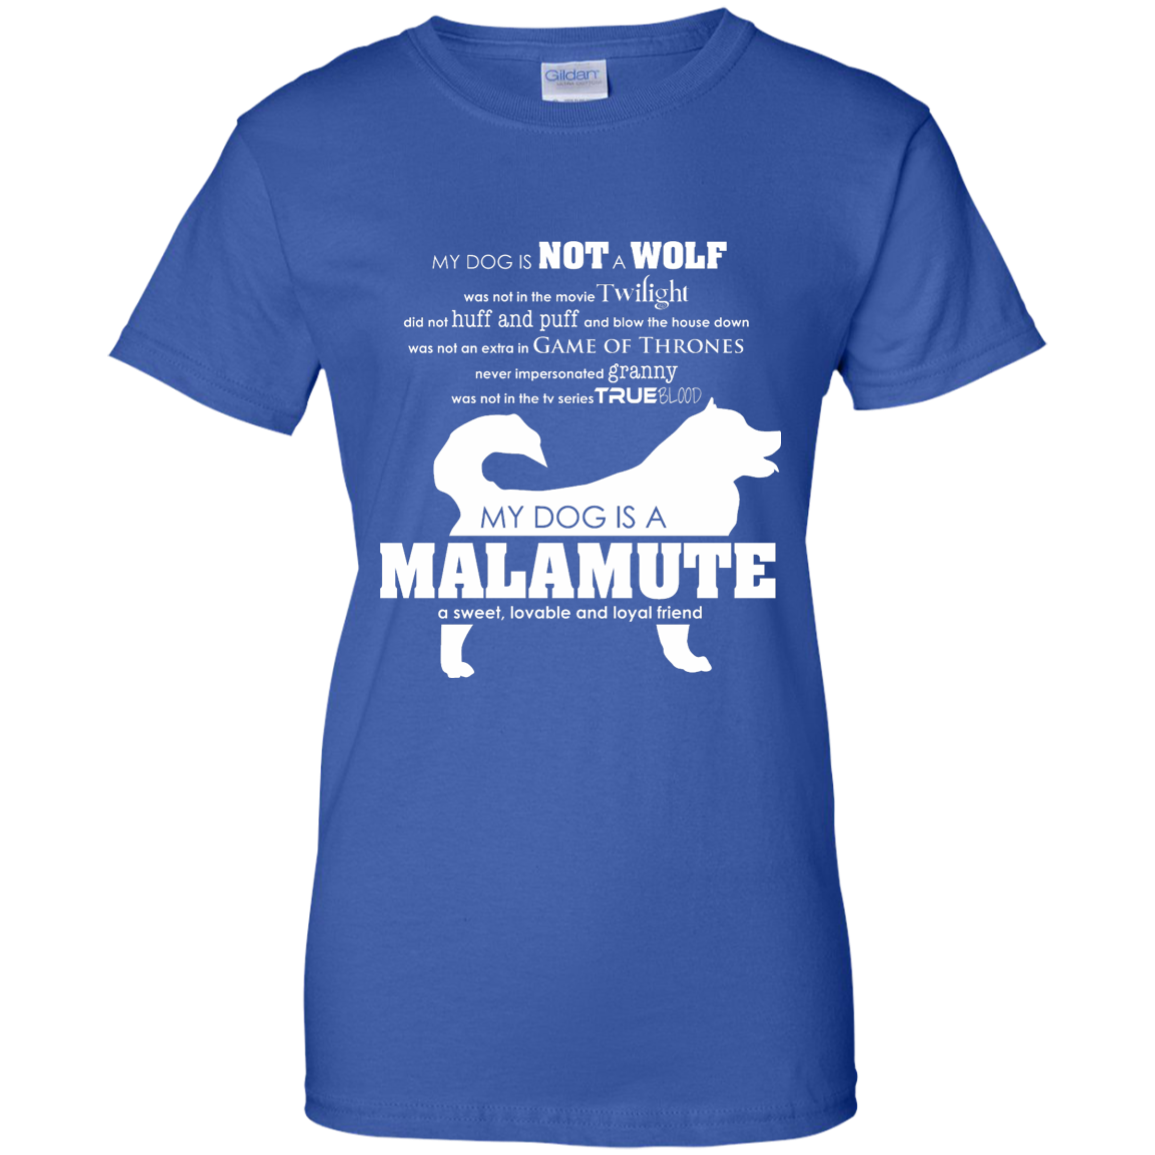 My Dog is Not a Wolf, My Dog is a Malamute - Ladies T-Shirt